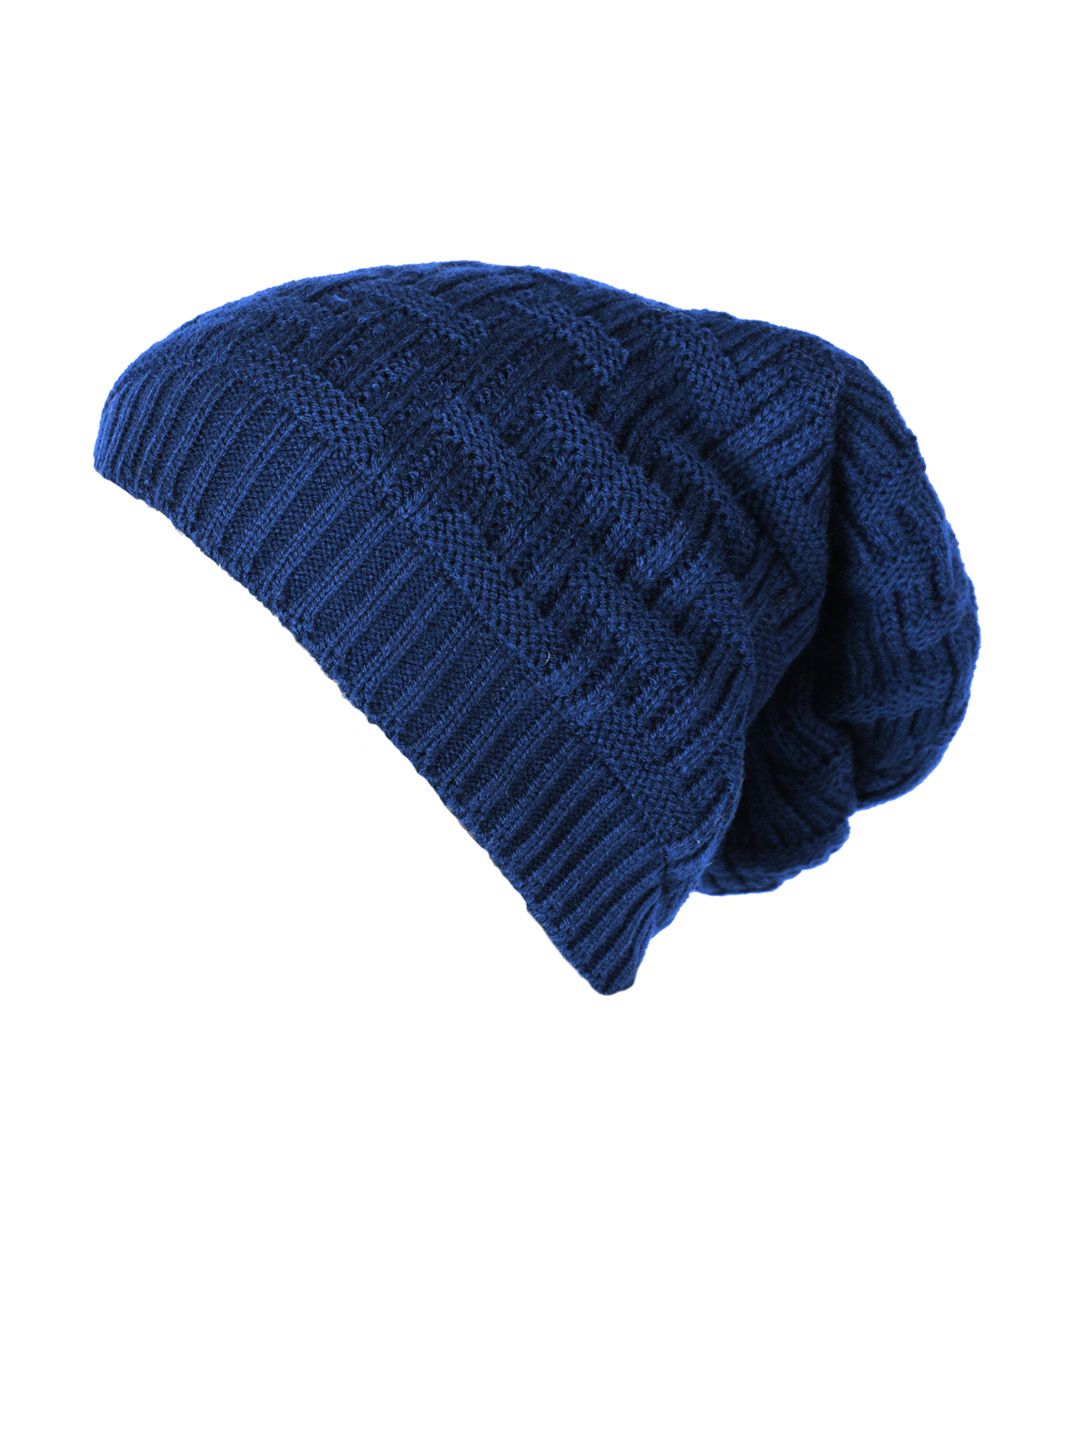 Knotyy Unisex Blue Self Design Beanie Price in India